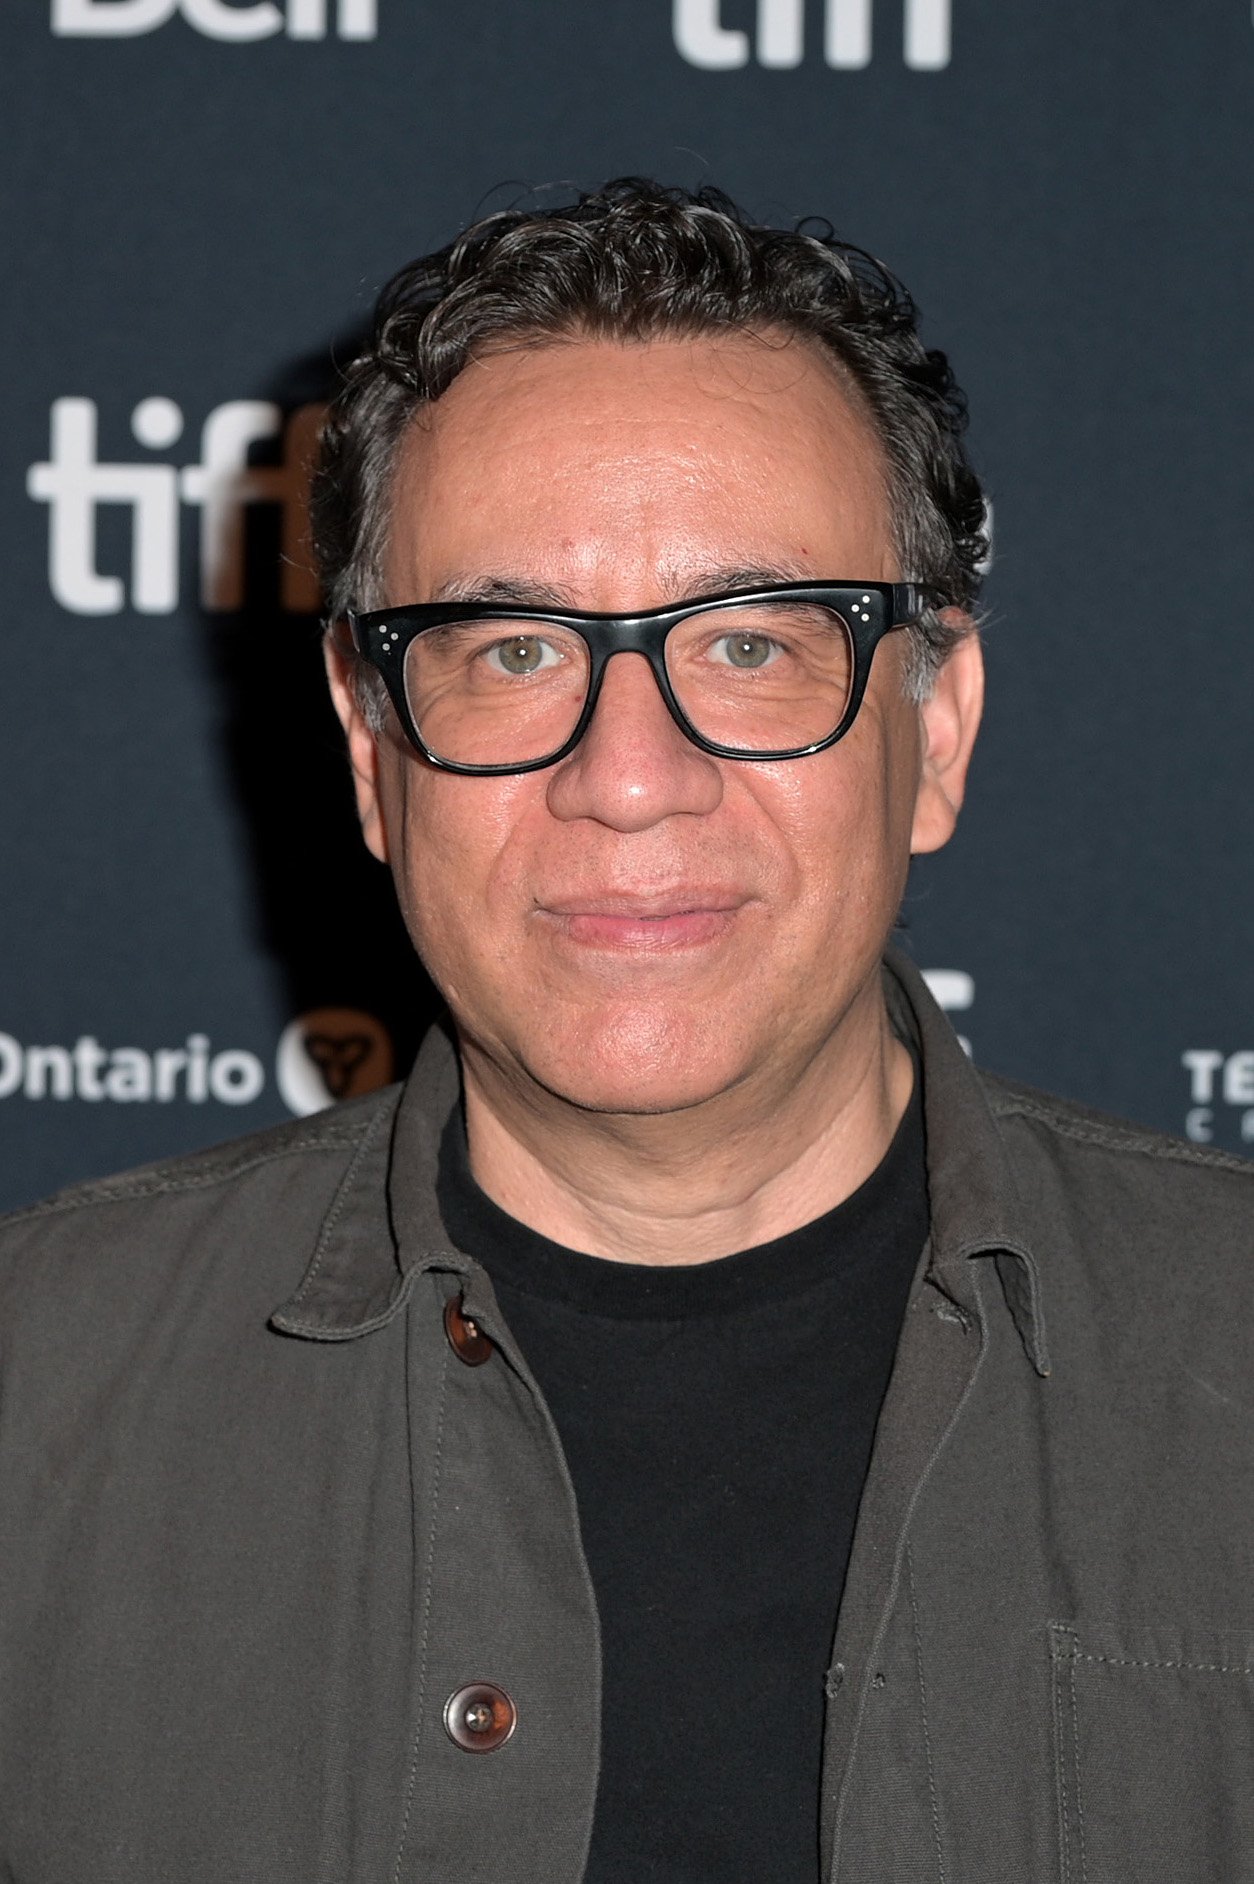 Fred Armisen at Scotiabank Theatre on September 10, 2022, in Toronto, Ontario. | Source: Getty Images